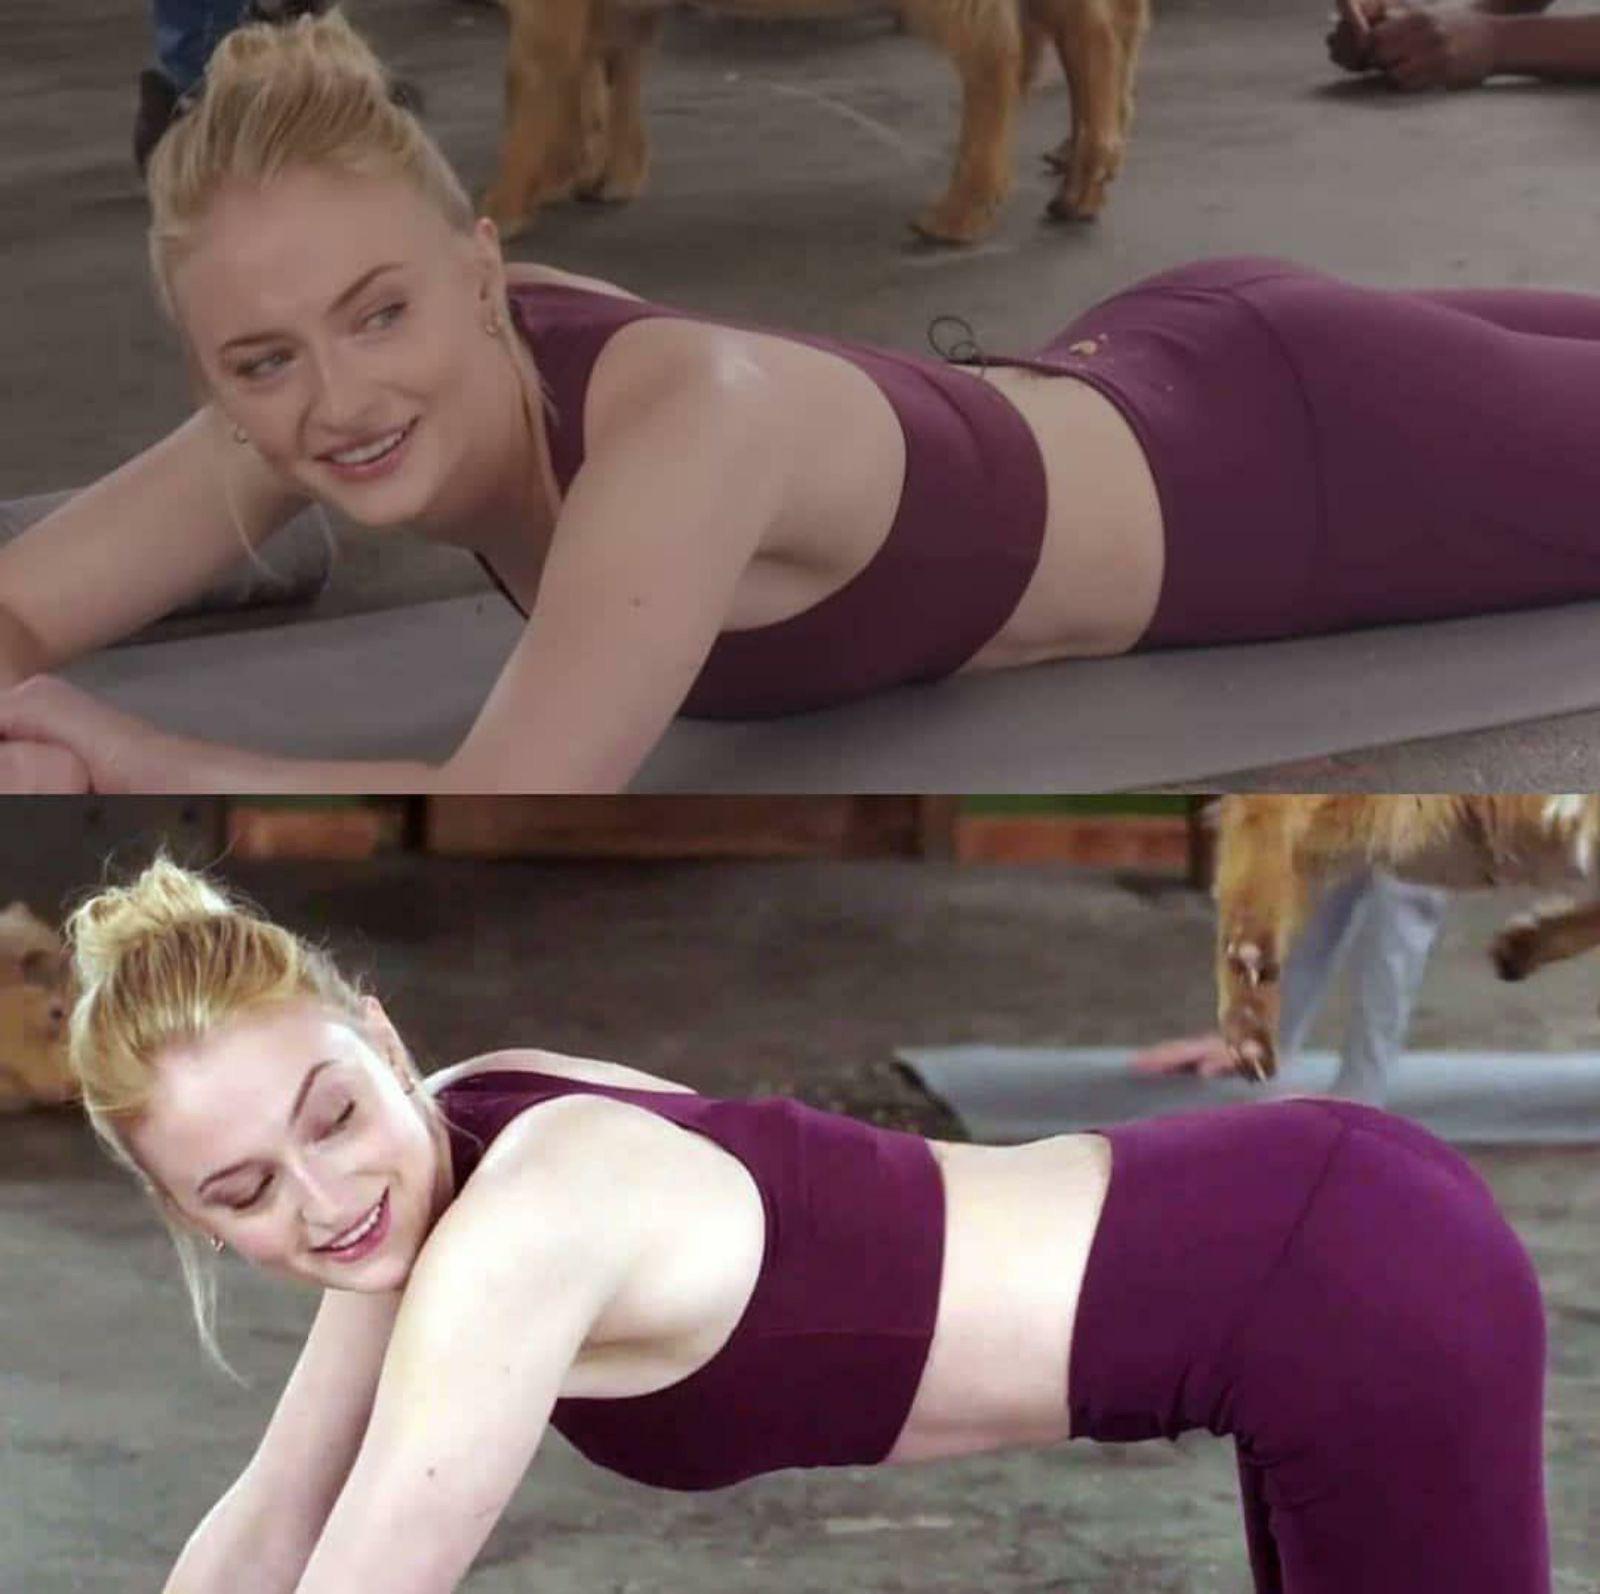 Sophie Turner looking tight in some hot yoga pants